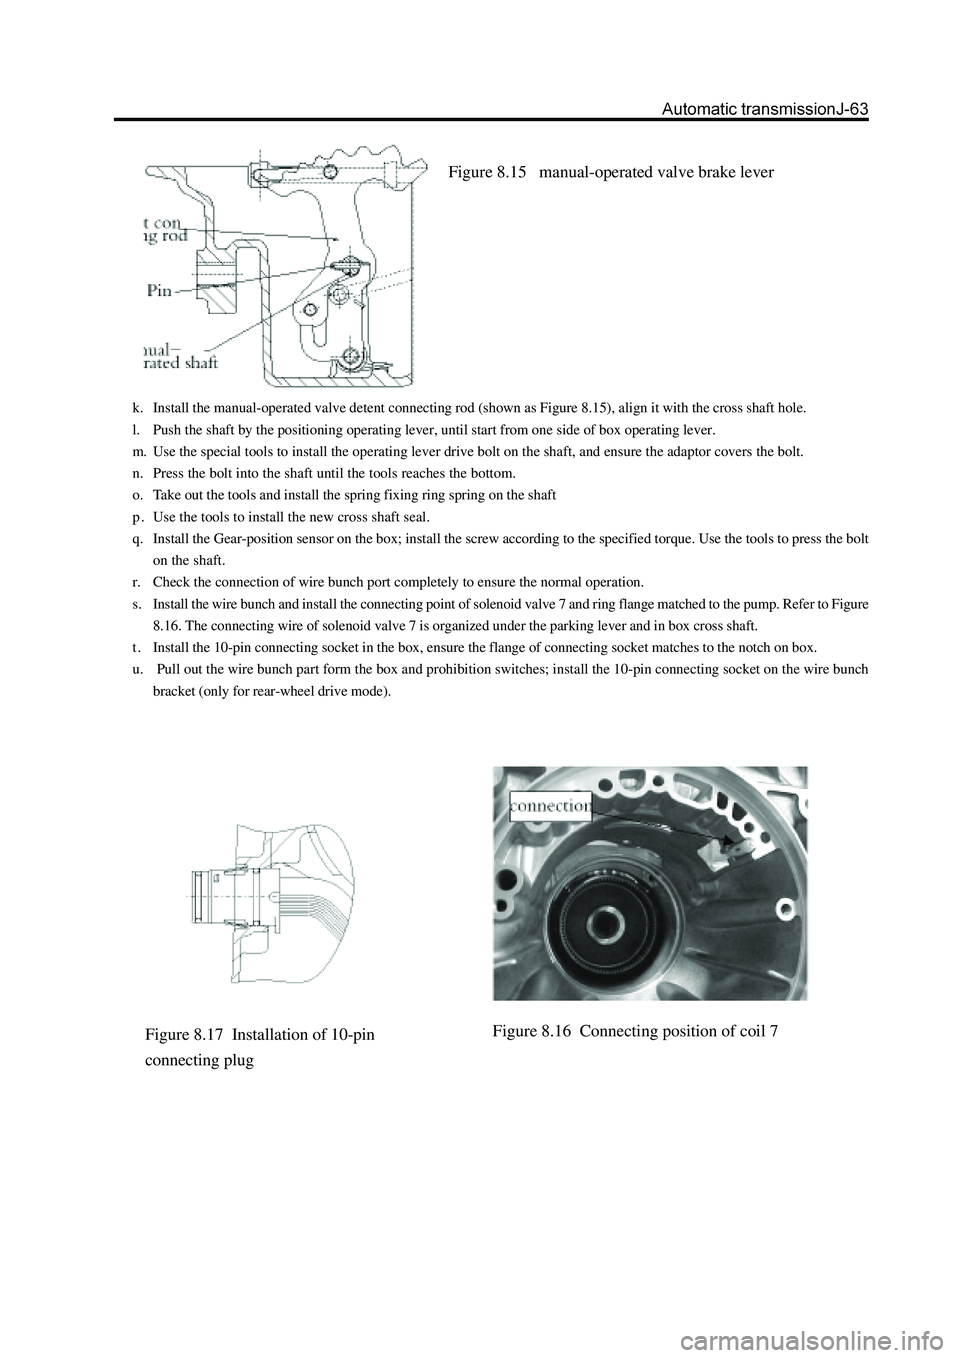 GREAT WALL HOVER 2006  Service Repair Manual Figure 8.15   manual-operated valve brake lever
k. Install the manual-operated valve detent connecting rod (shown as Figure 8.15), align it with the cross shaft hole.
l. Push the shaft by the position